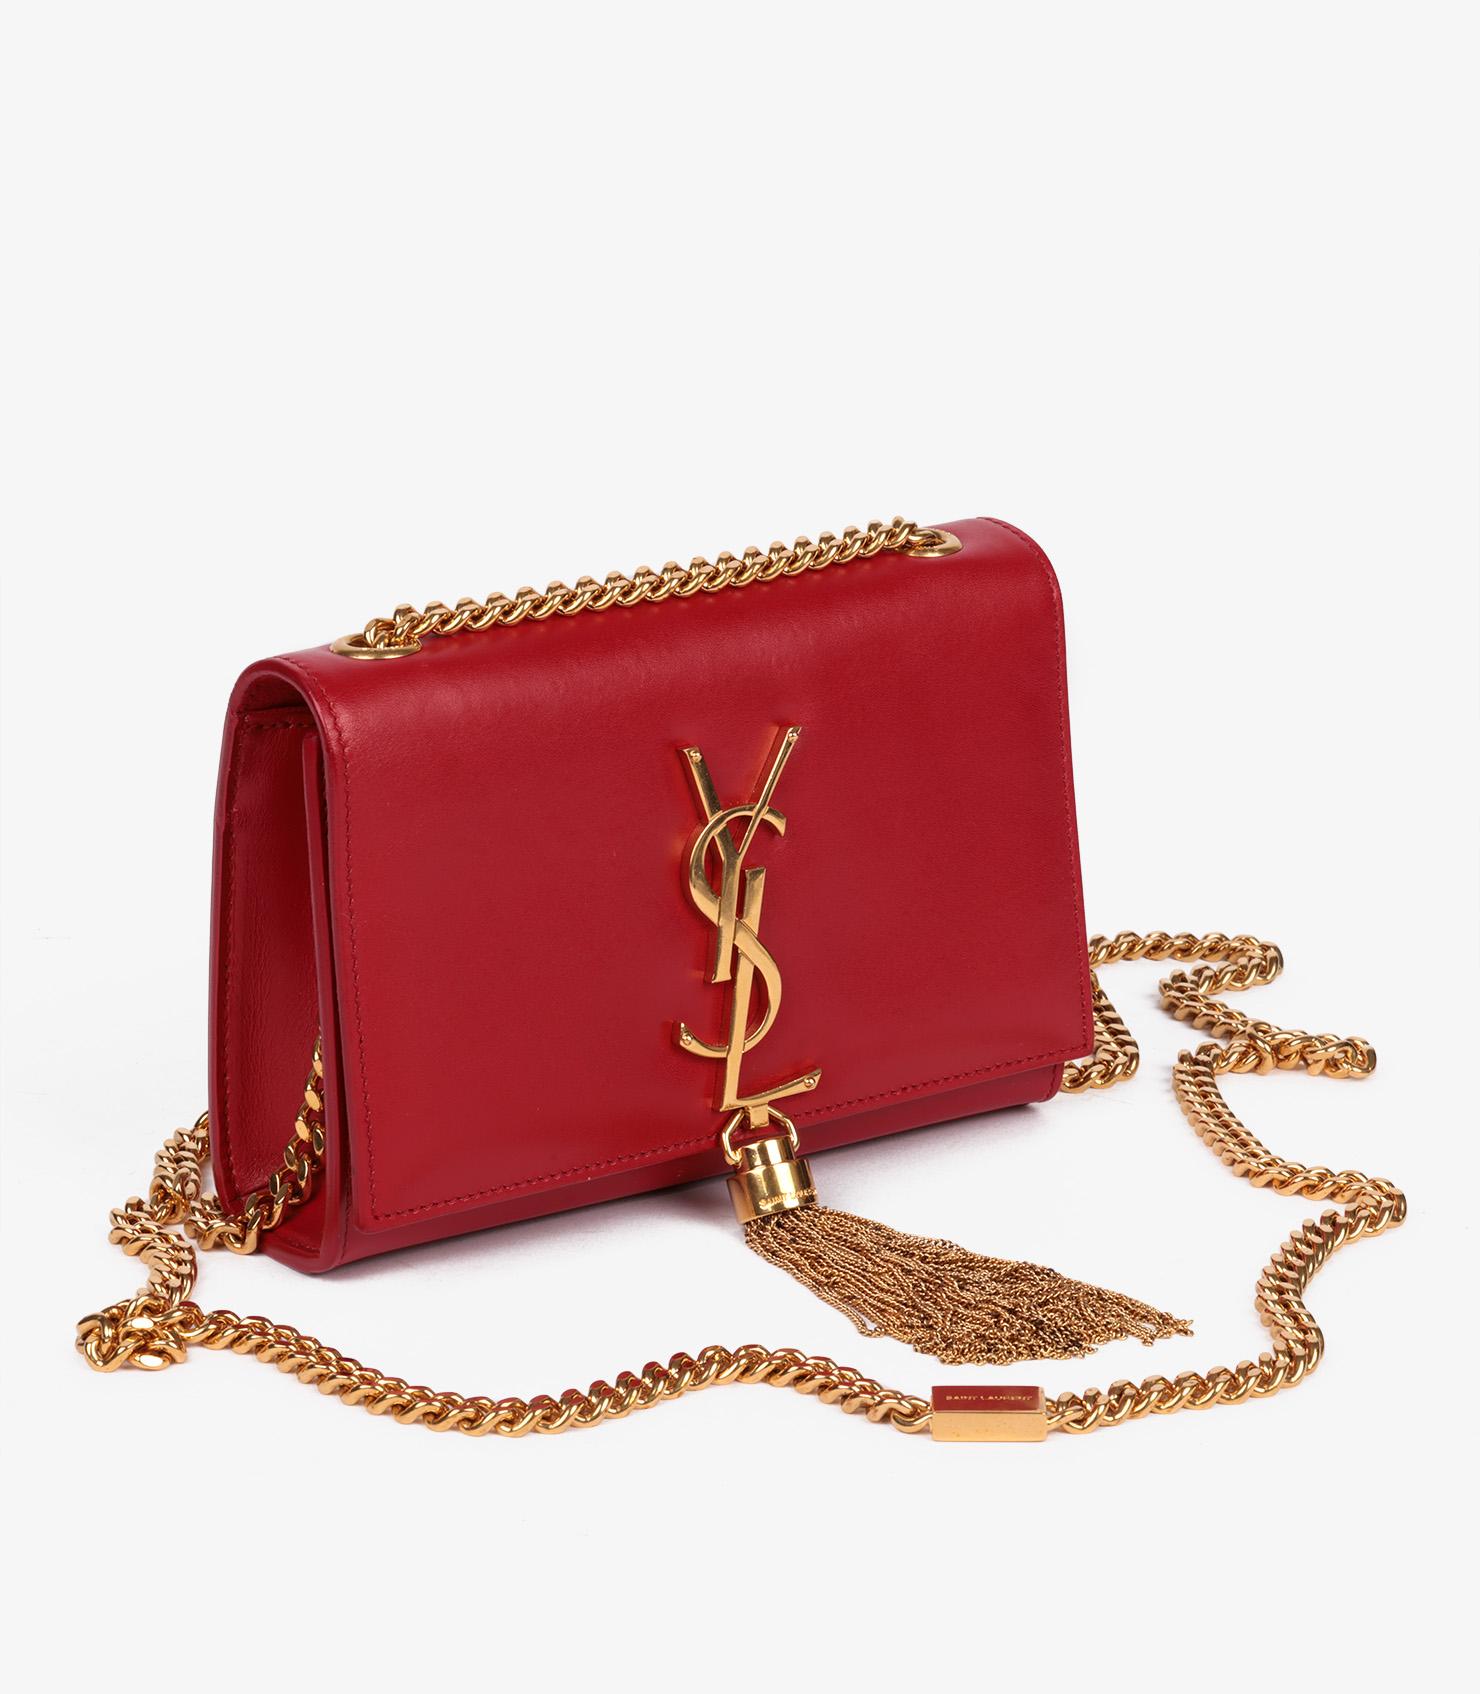 Saint Laurent Red Smooth Calfskin Leather Mini Kate Tassel

Brand- Saint Laurent
Model- Mini Kate Tassel
Product Type- Crossbody, Shoulder
Serial Number- PT************
Age- Circa 2013
Accompanied By- Saint Laurent Dust Bag, Care Book, Leather